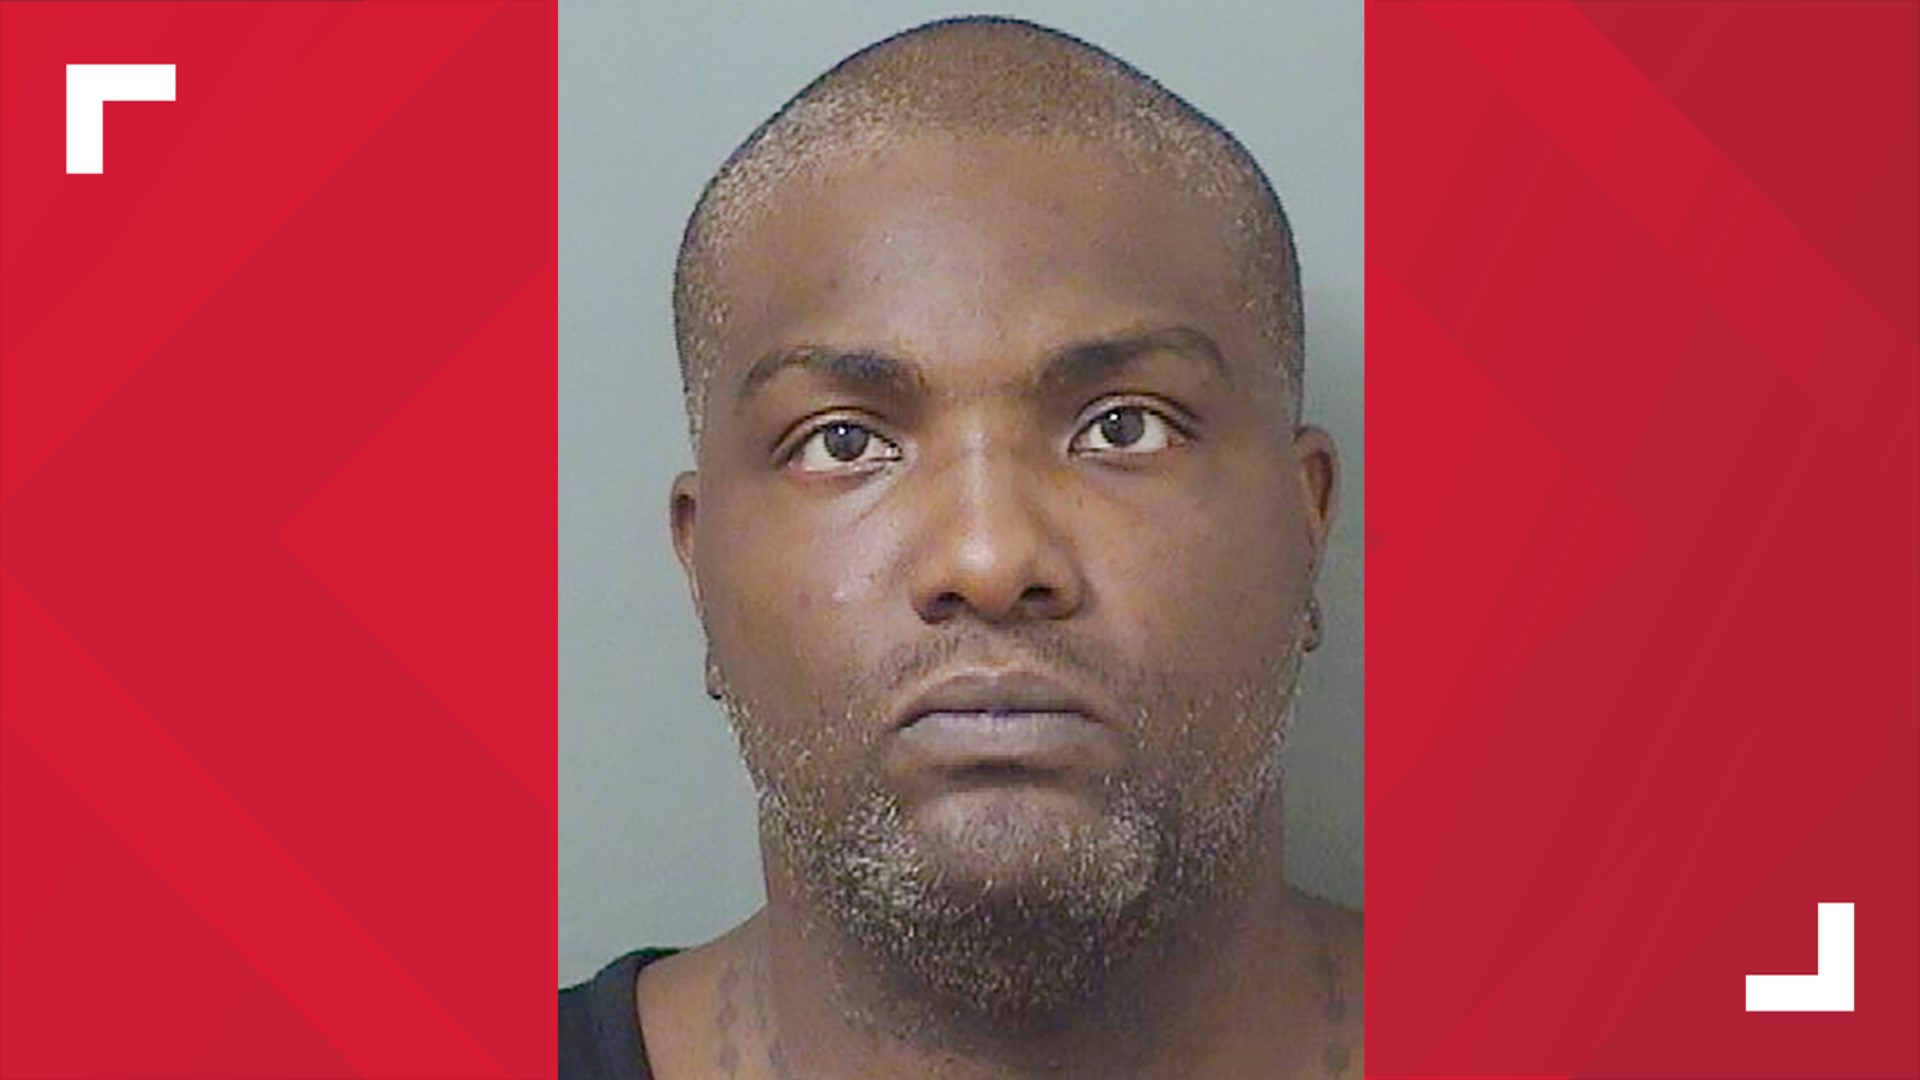 Palm Beach County deputies arrested Robert Hayes Sunday, charged with first-degree murder in the death of a woman in 2016. He is a suspect in the killings of three women in 2005 and 2006. In between those murders, court records show he lived in Charlotte for a time.